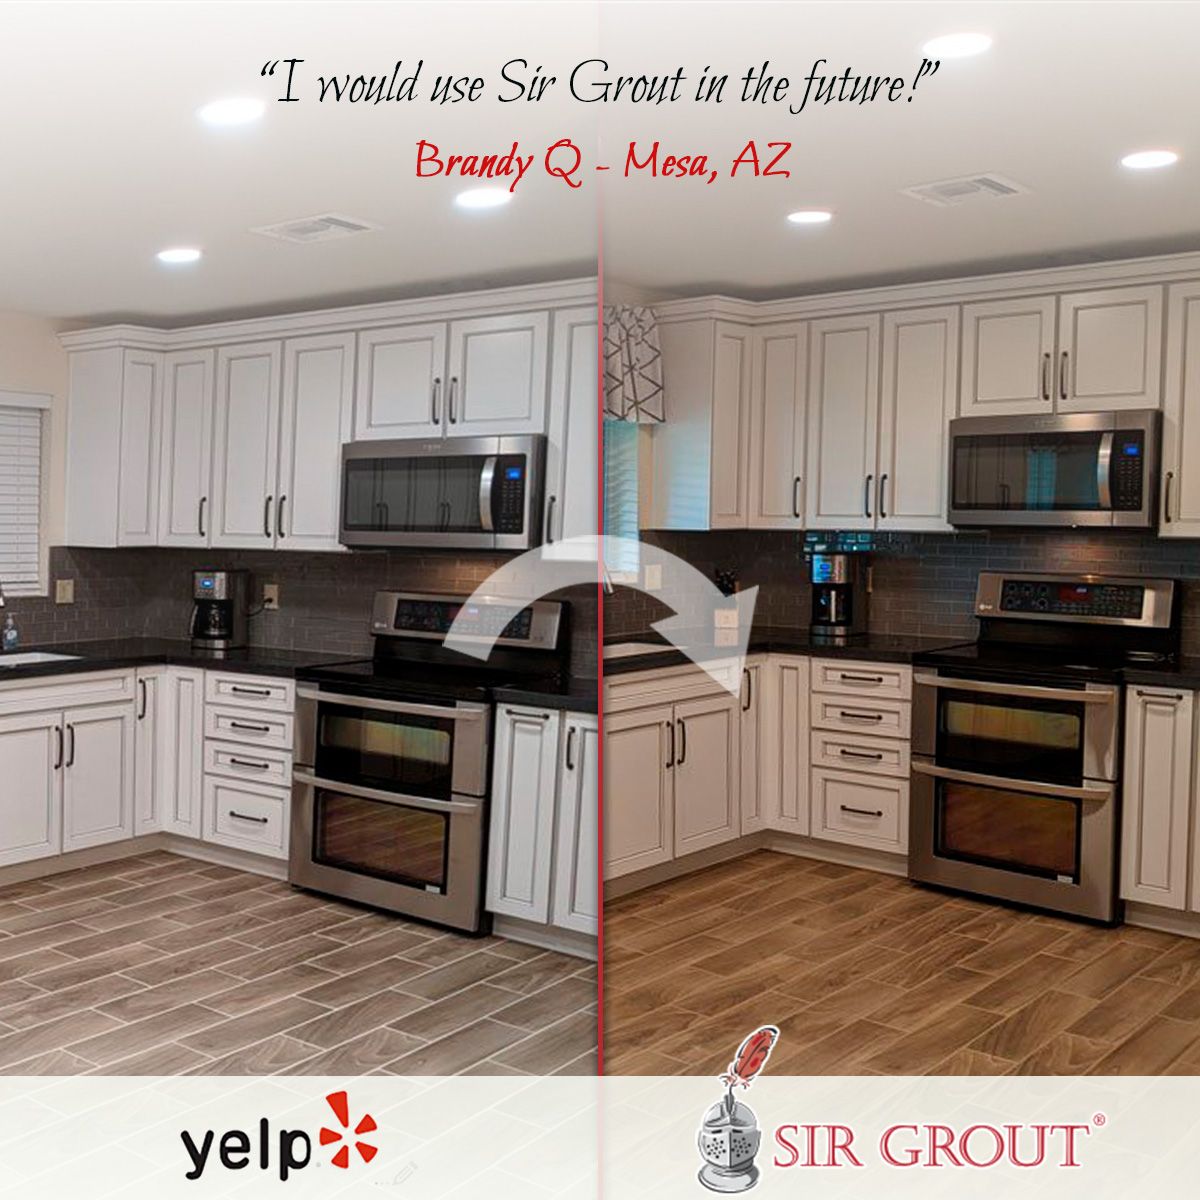 I would use Sir Grout in the future!